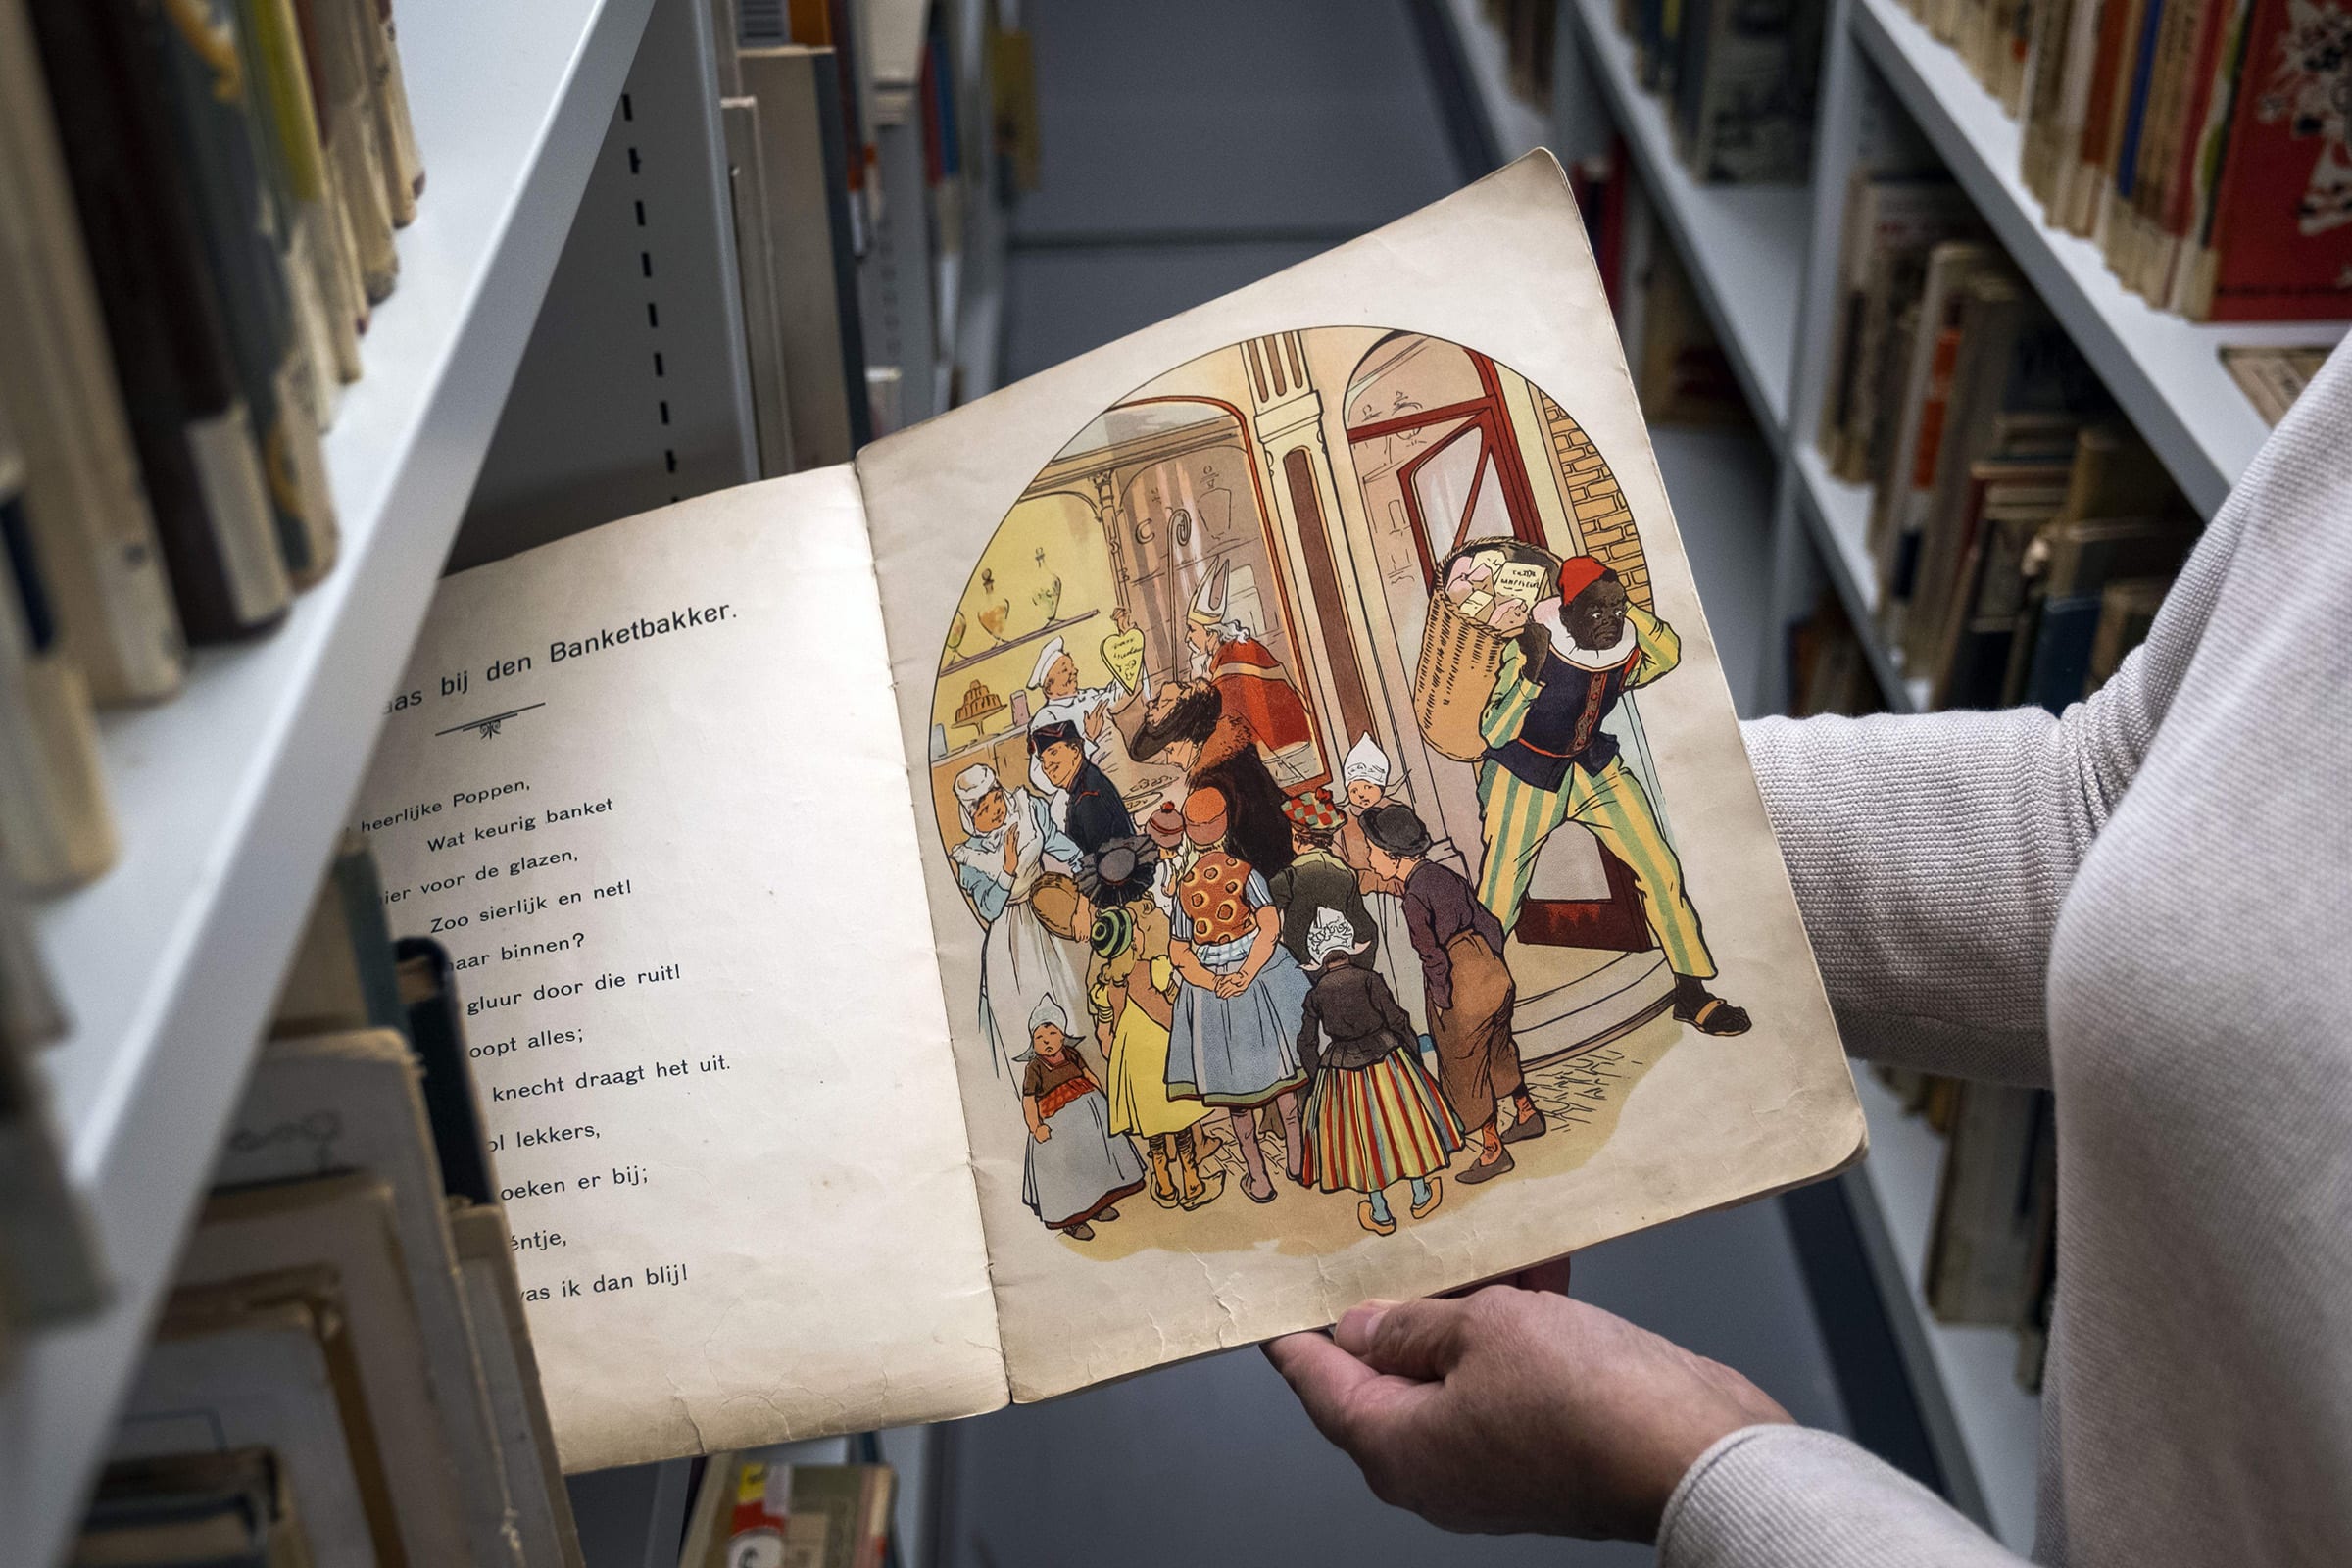 An Amsterdam Public Library employee with a book about Sinterklaas and Zwarte Piet (Black Pete) in Amsterdam, on Nov. 12, 2020.